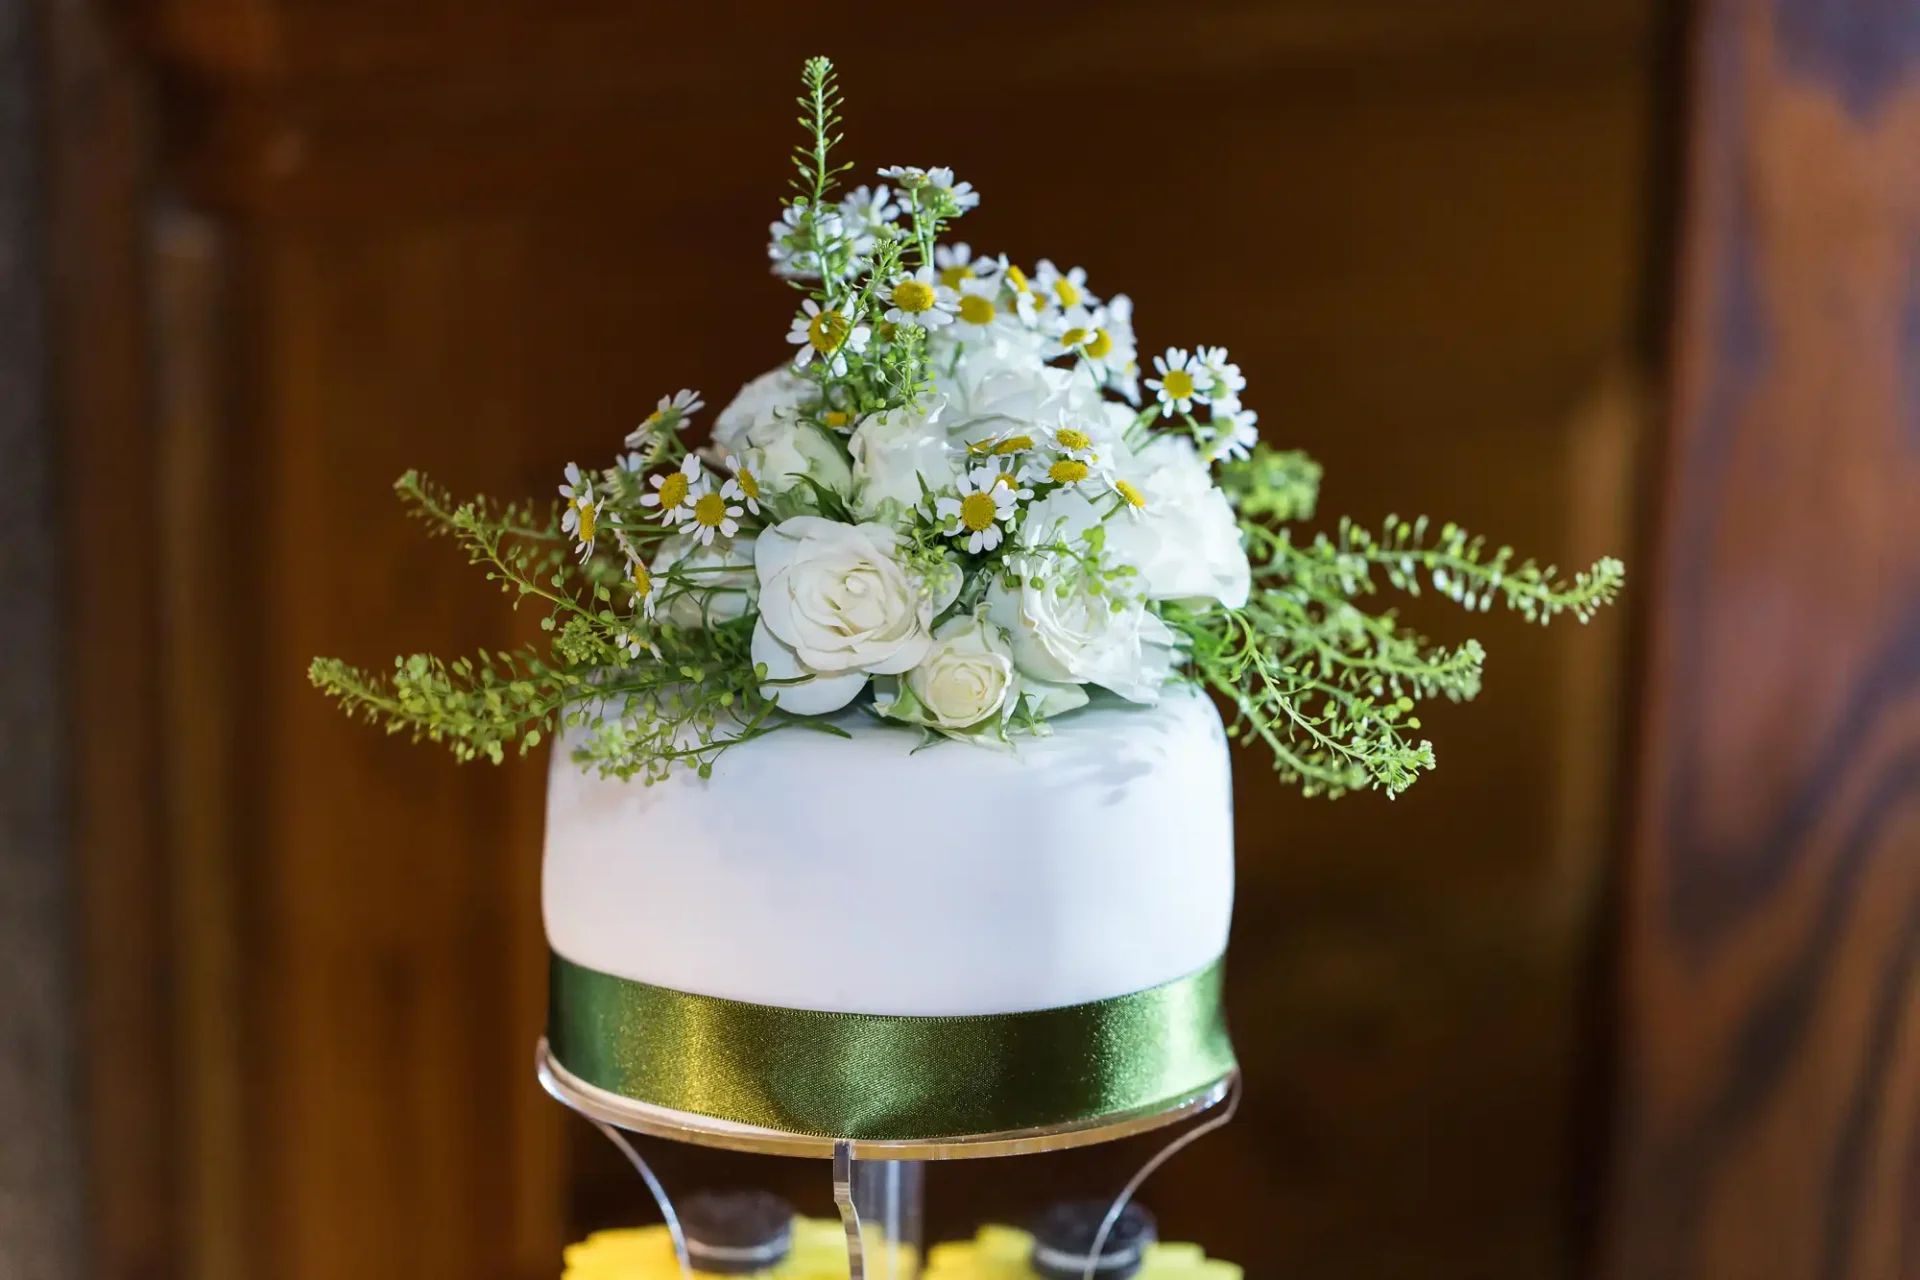 A white wedding cake decorated with fresh white roses and wildflowers, topped with greenery on a cake stand.